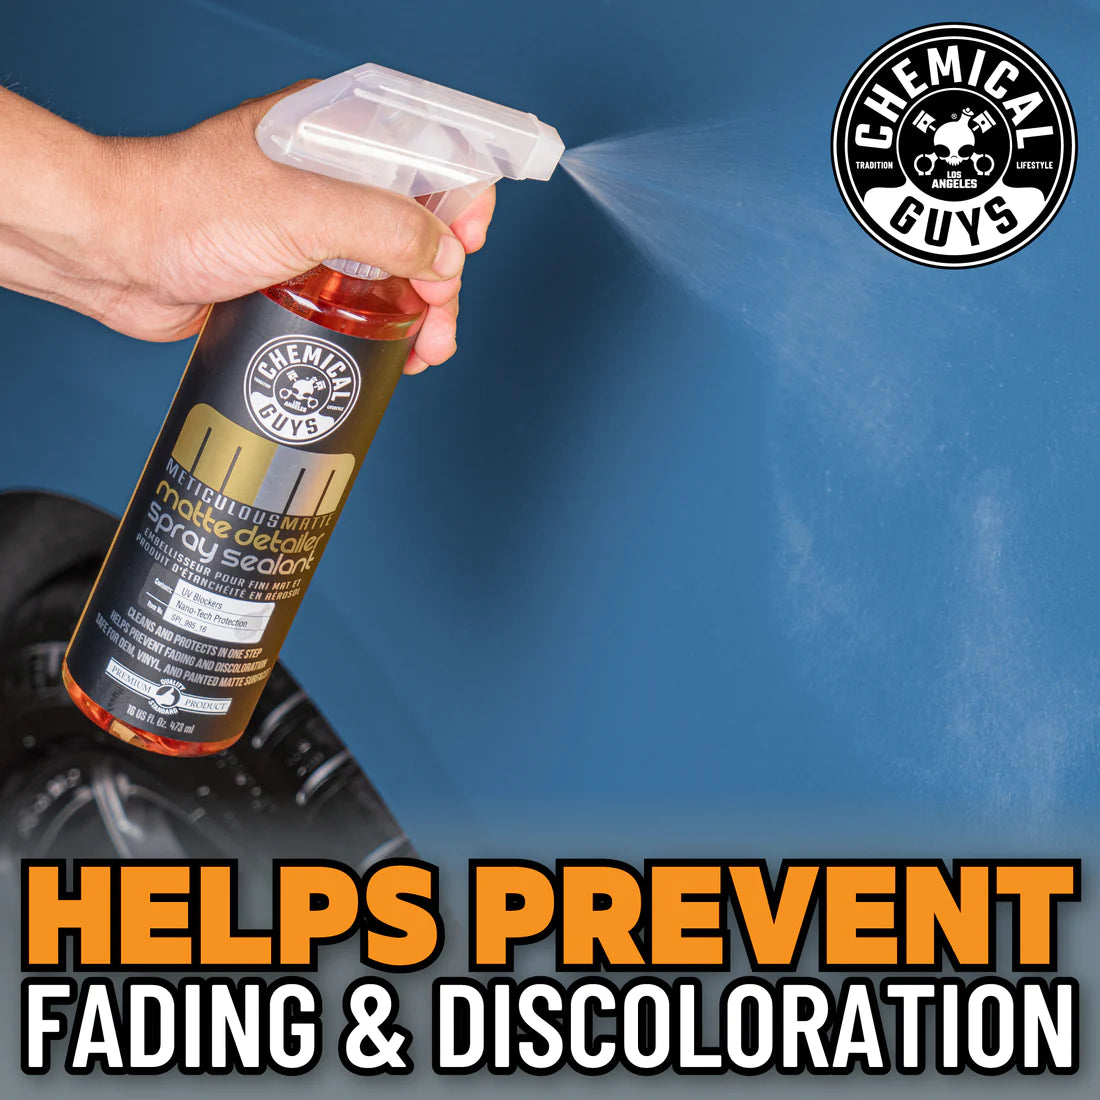 Chemical Guys Meticulous Matte Detailer and Spray Sealant - 16oz